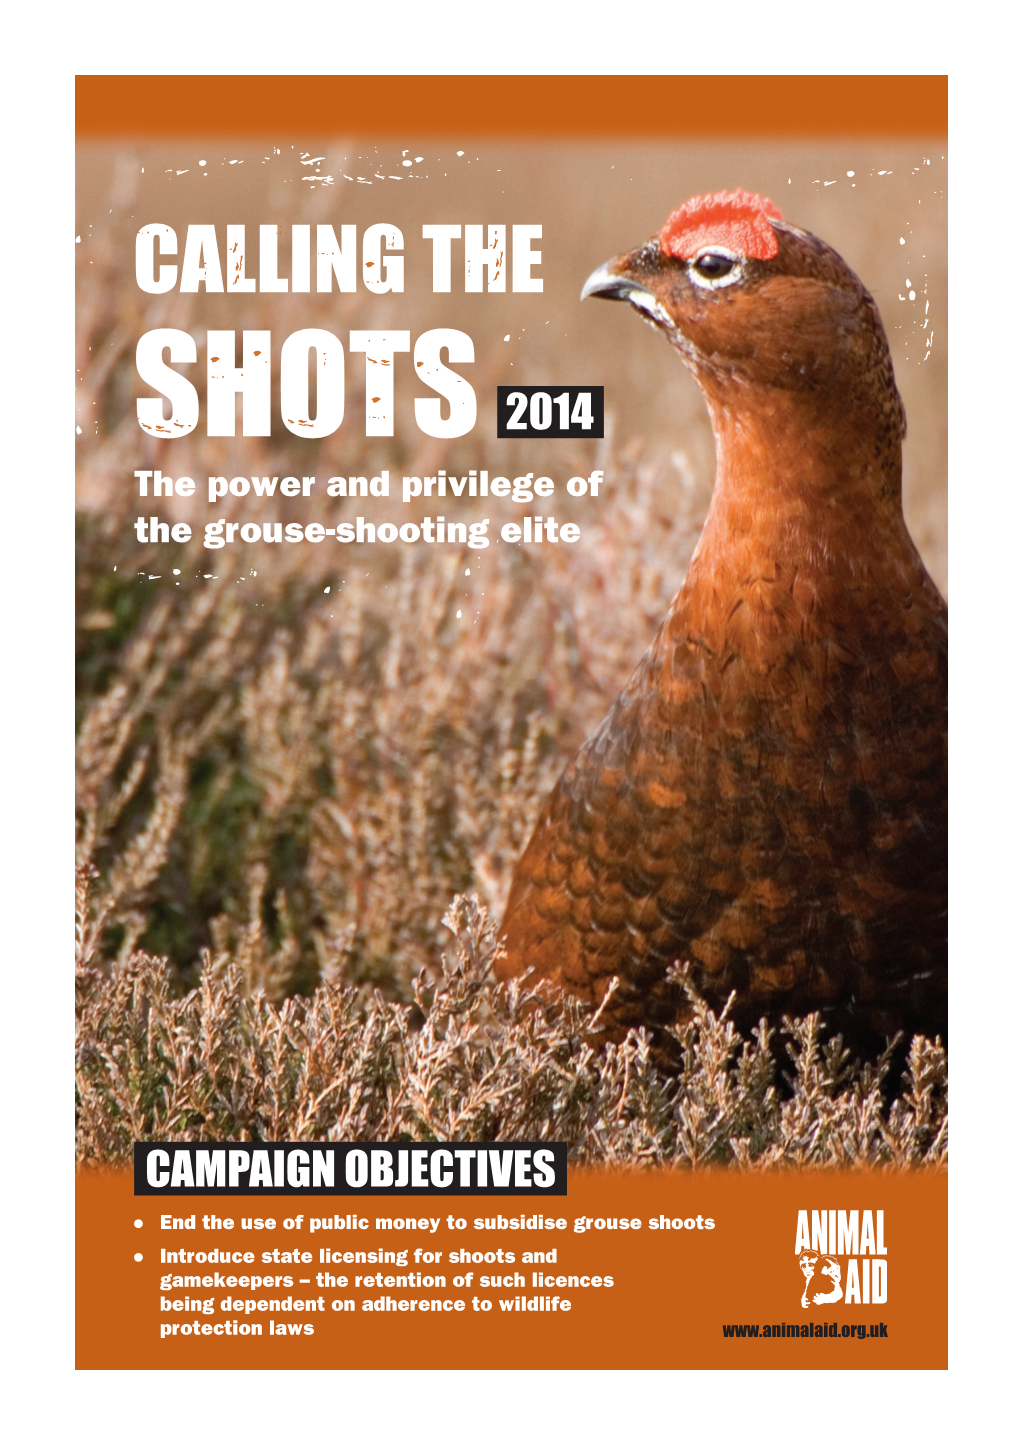 Calling the Shots 2014 – the Power and Privilege of the Grouse-Shooting Elite